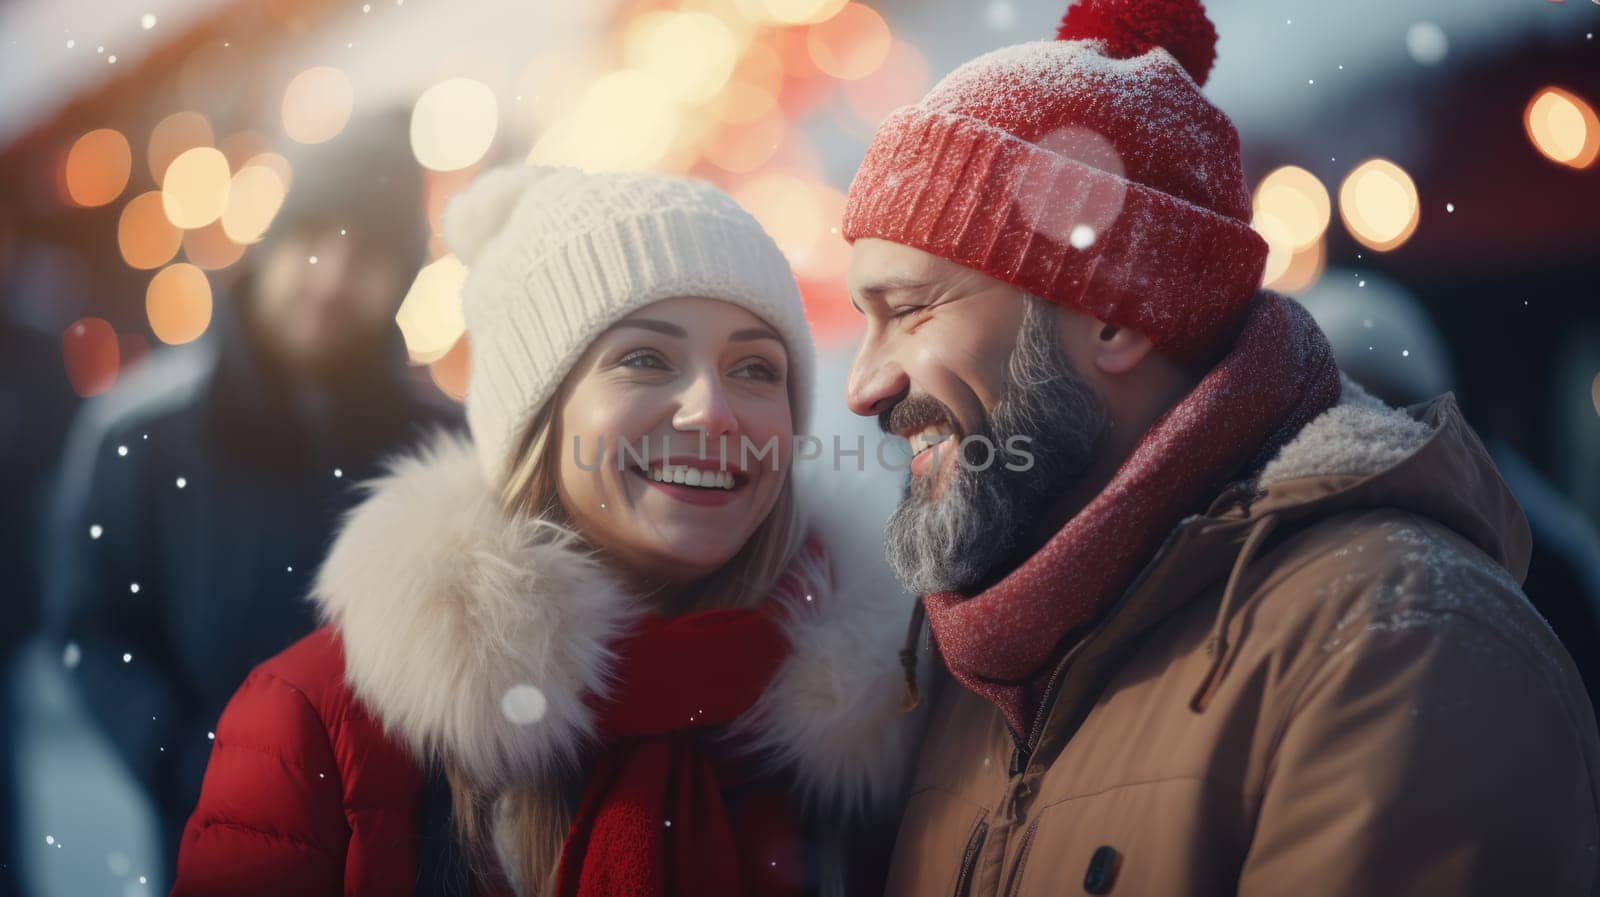 Happy Friends wearing winter clothes celebrating Christmas holiday. People having fun hanging out together walking on city street. Winter holidays and relationship concept by JuliaDorian